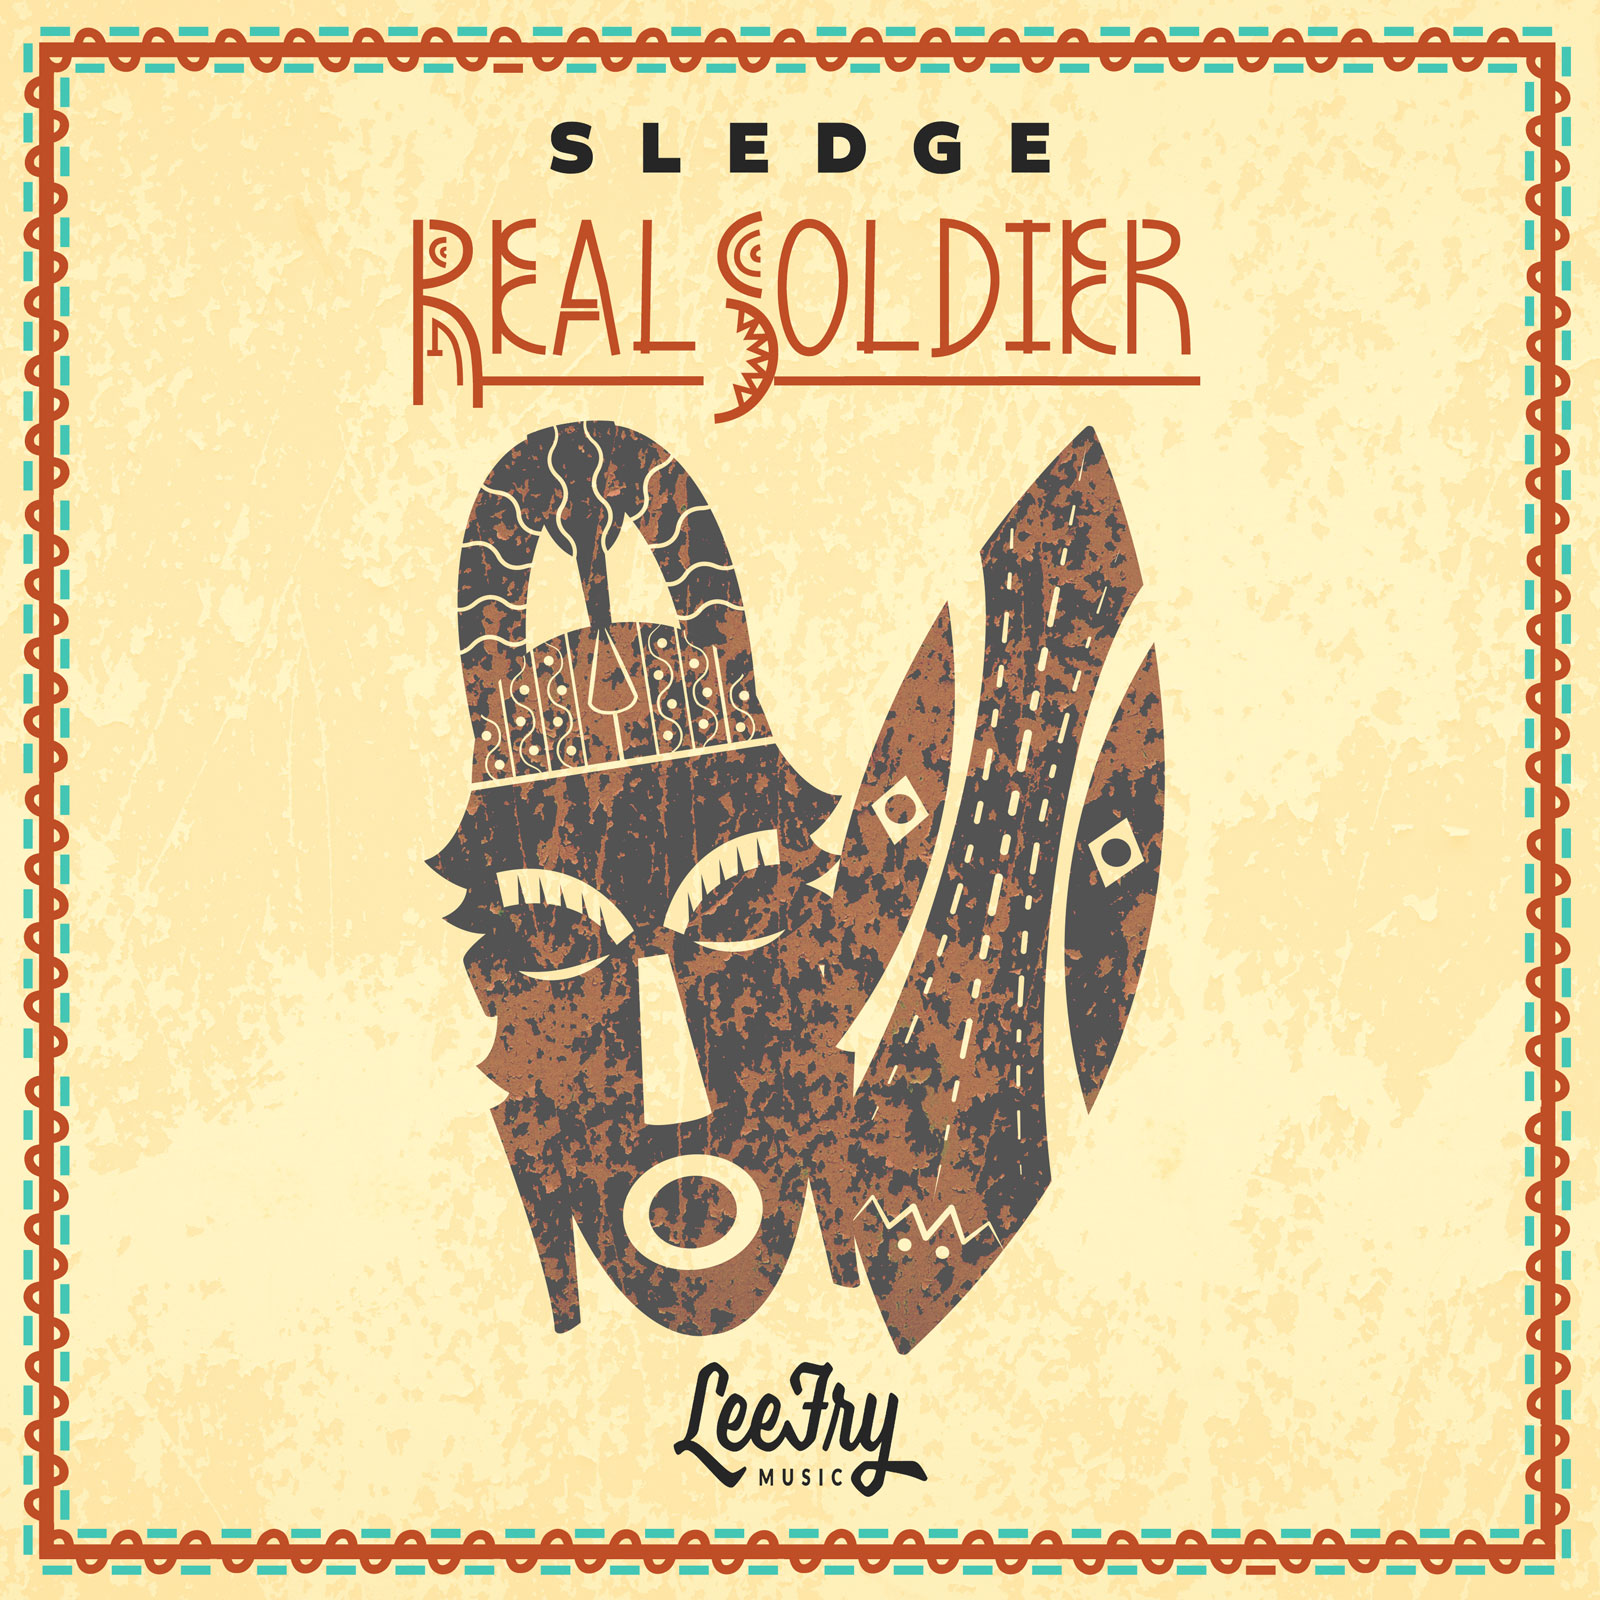 Lee Fry Music: ‘Real Soldier’ feat. Sledge